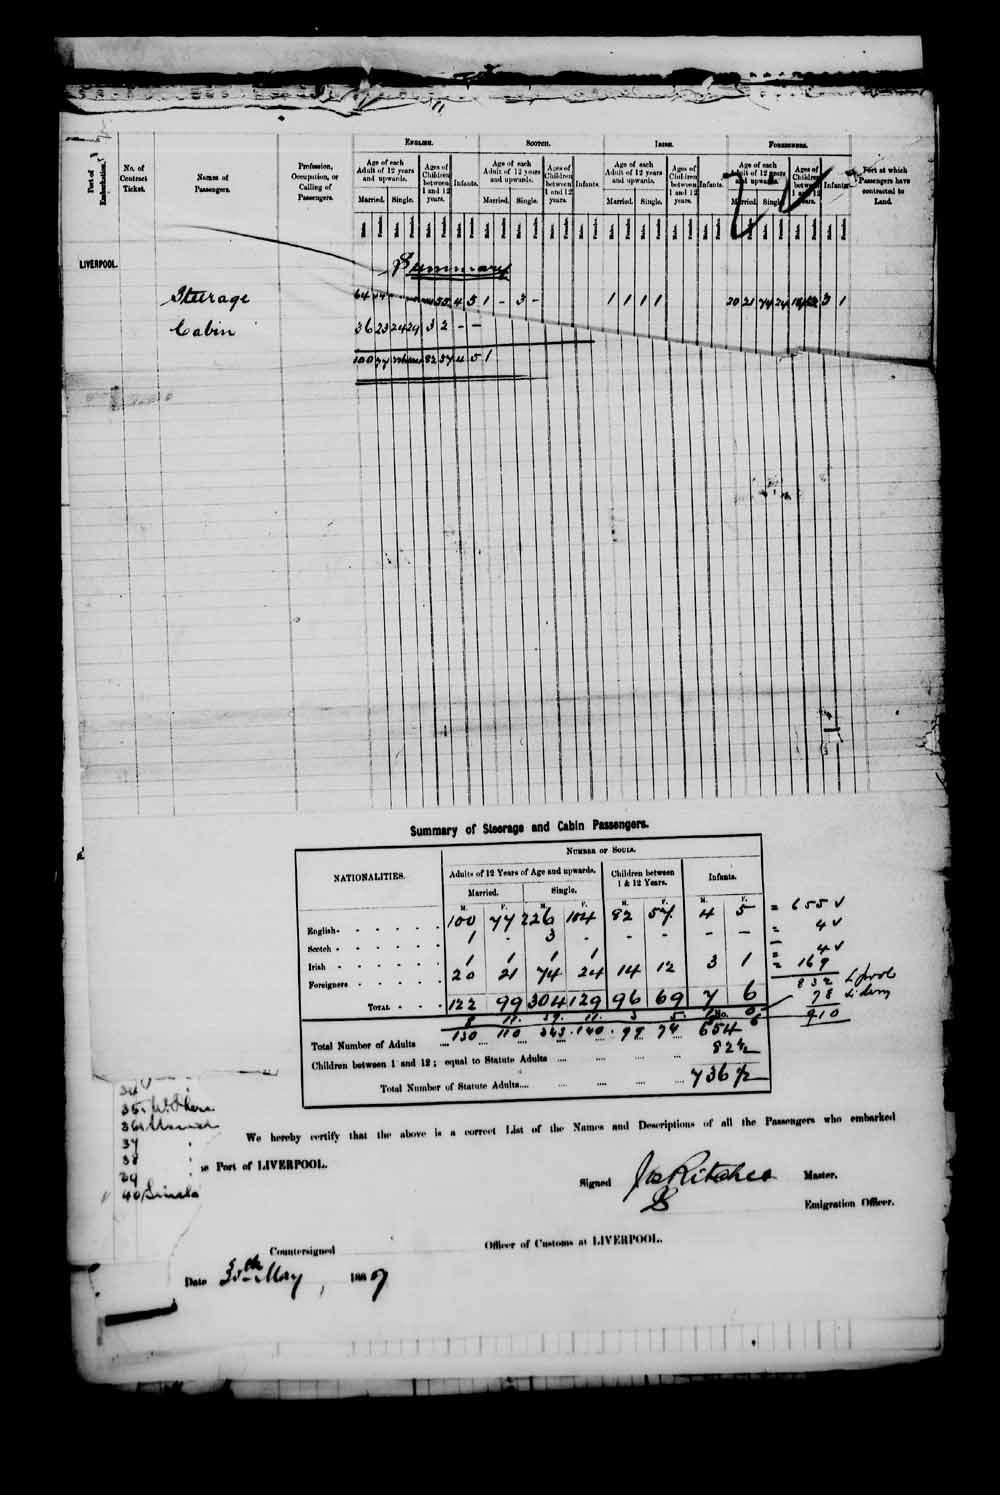 Digitized page of Passenger Lists for Image No.: e003549665